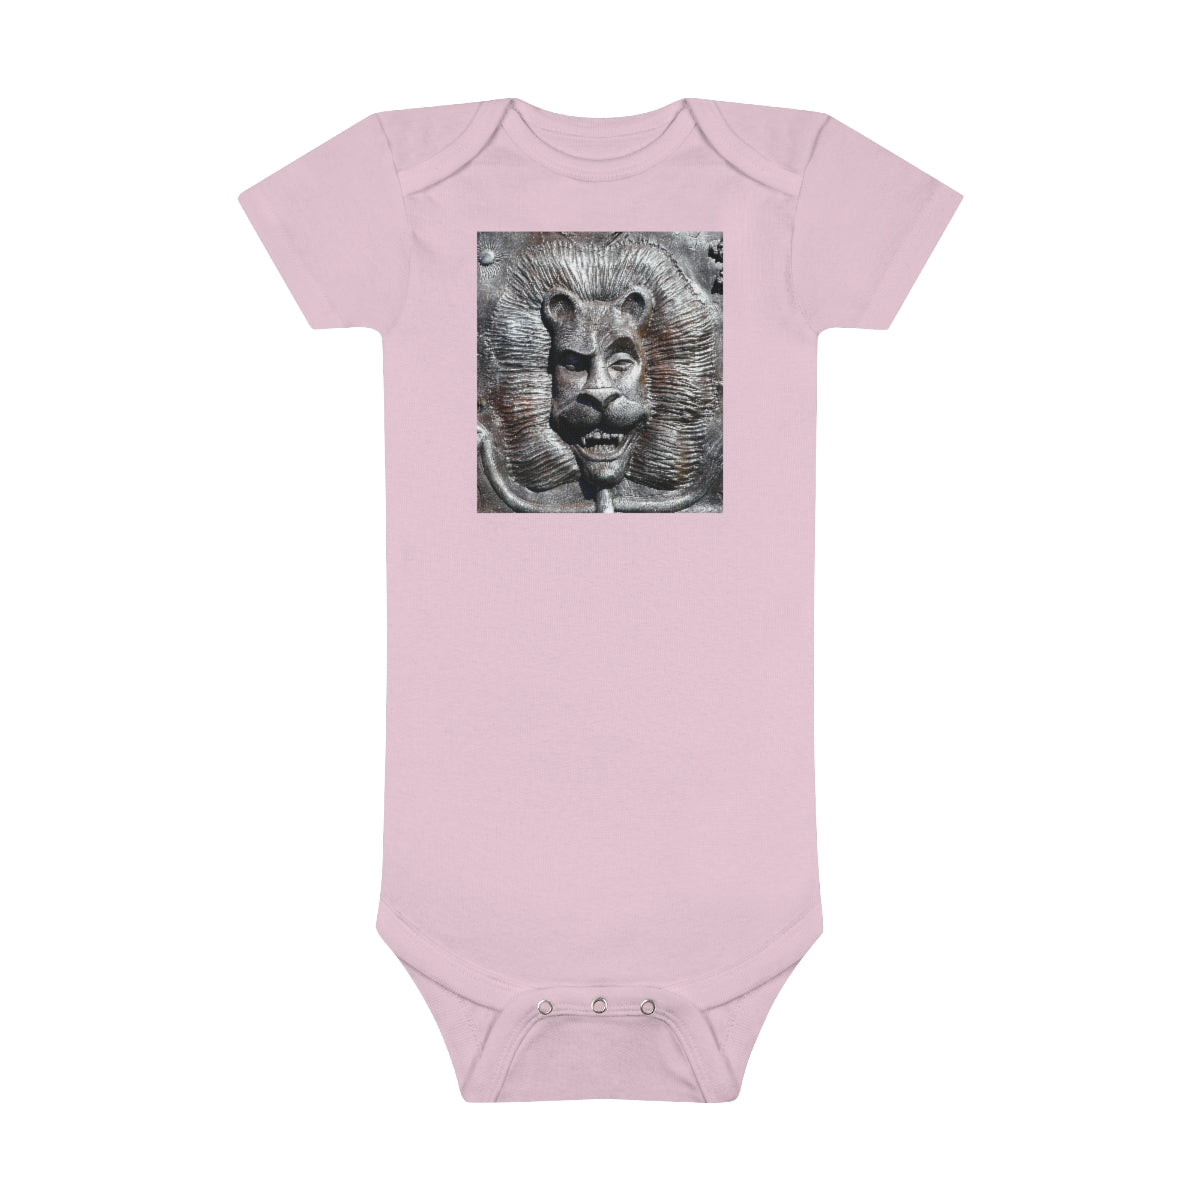 Lion's Friends Forever - Baby Short Sleeve Onesie - Fry1Productions